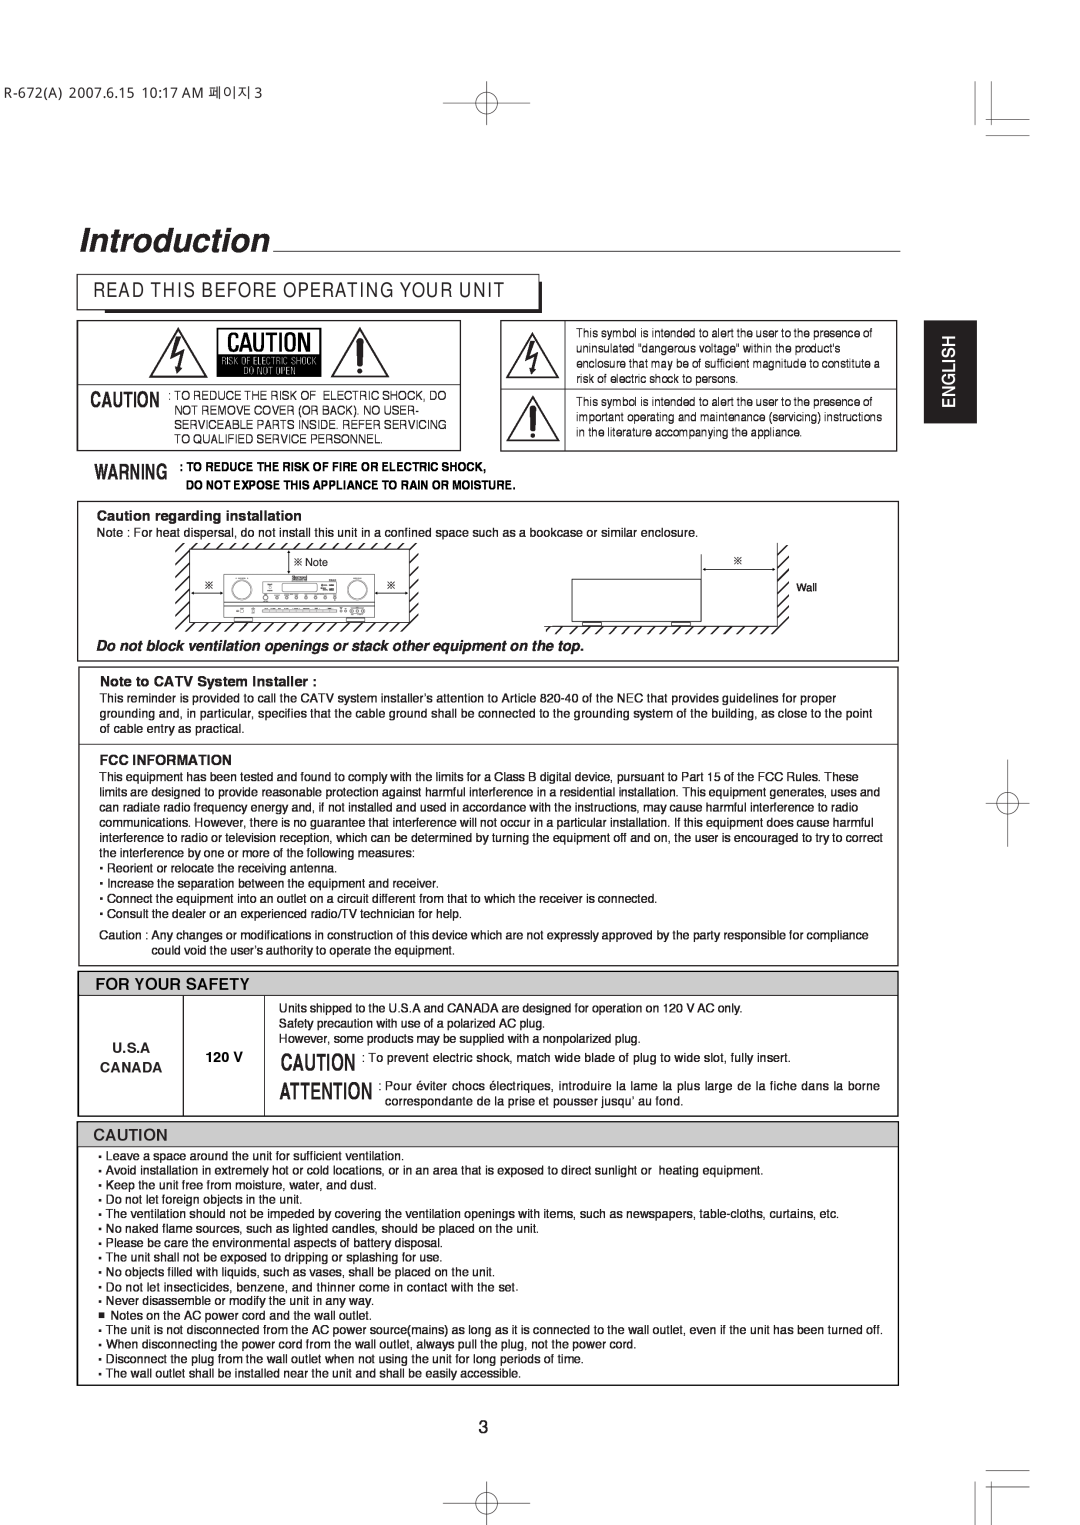 XM Satellite Radio R-672 manual Introduction, Read This Before Operating Your Unit, English, For Your Safety 